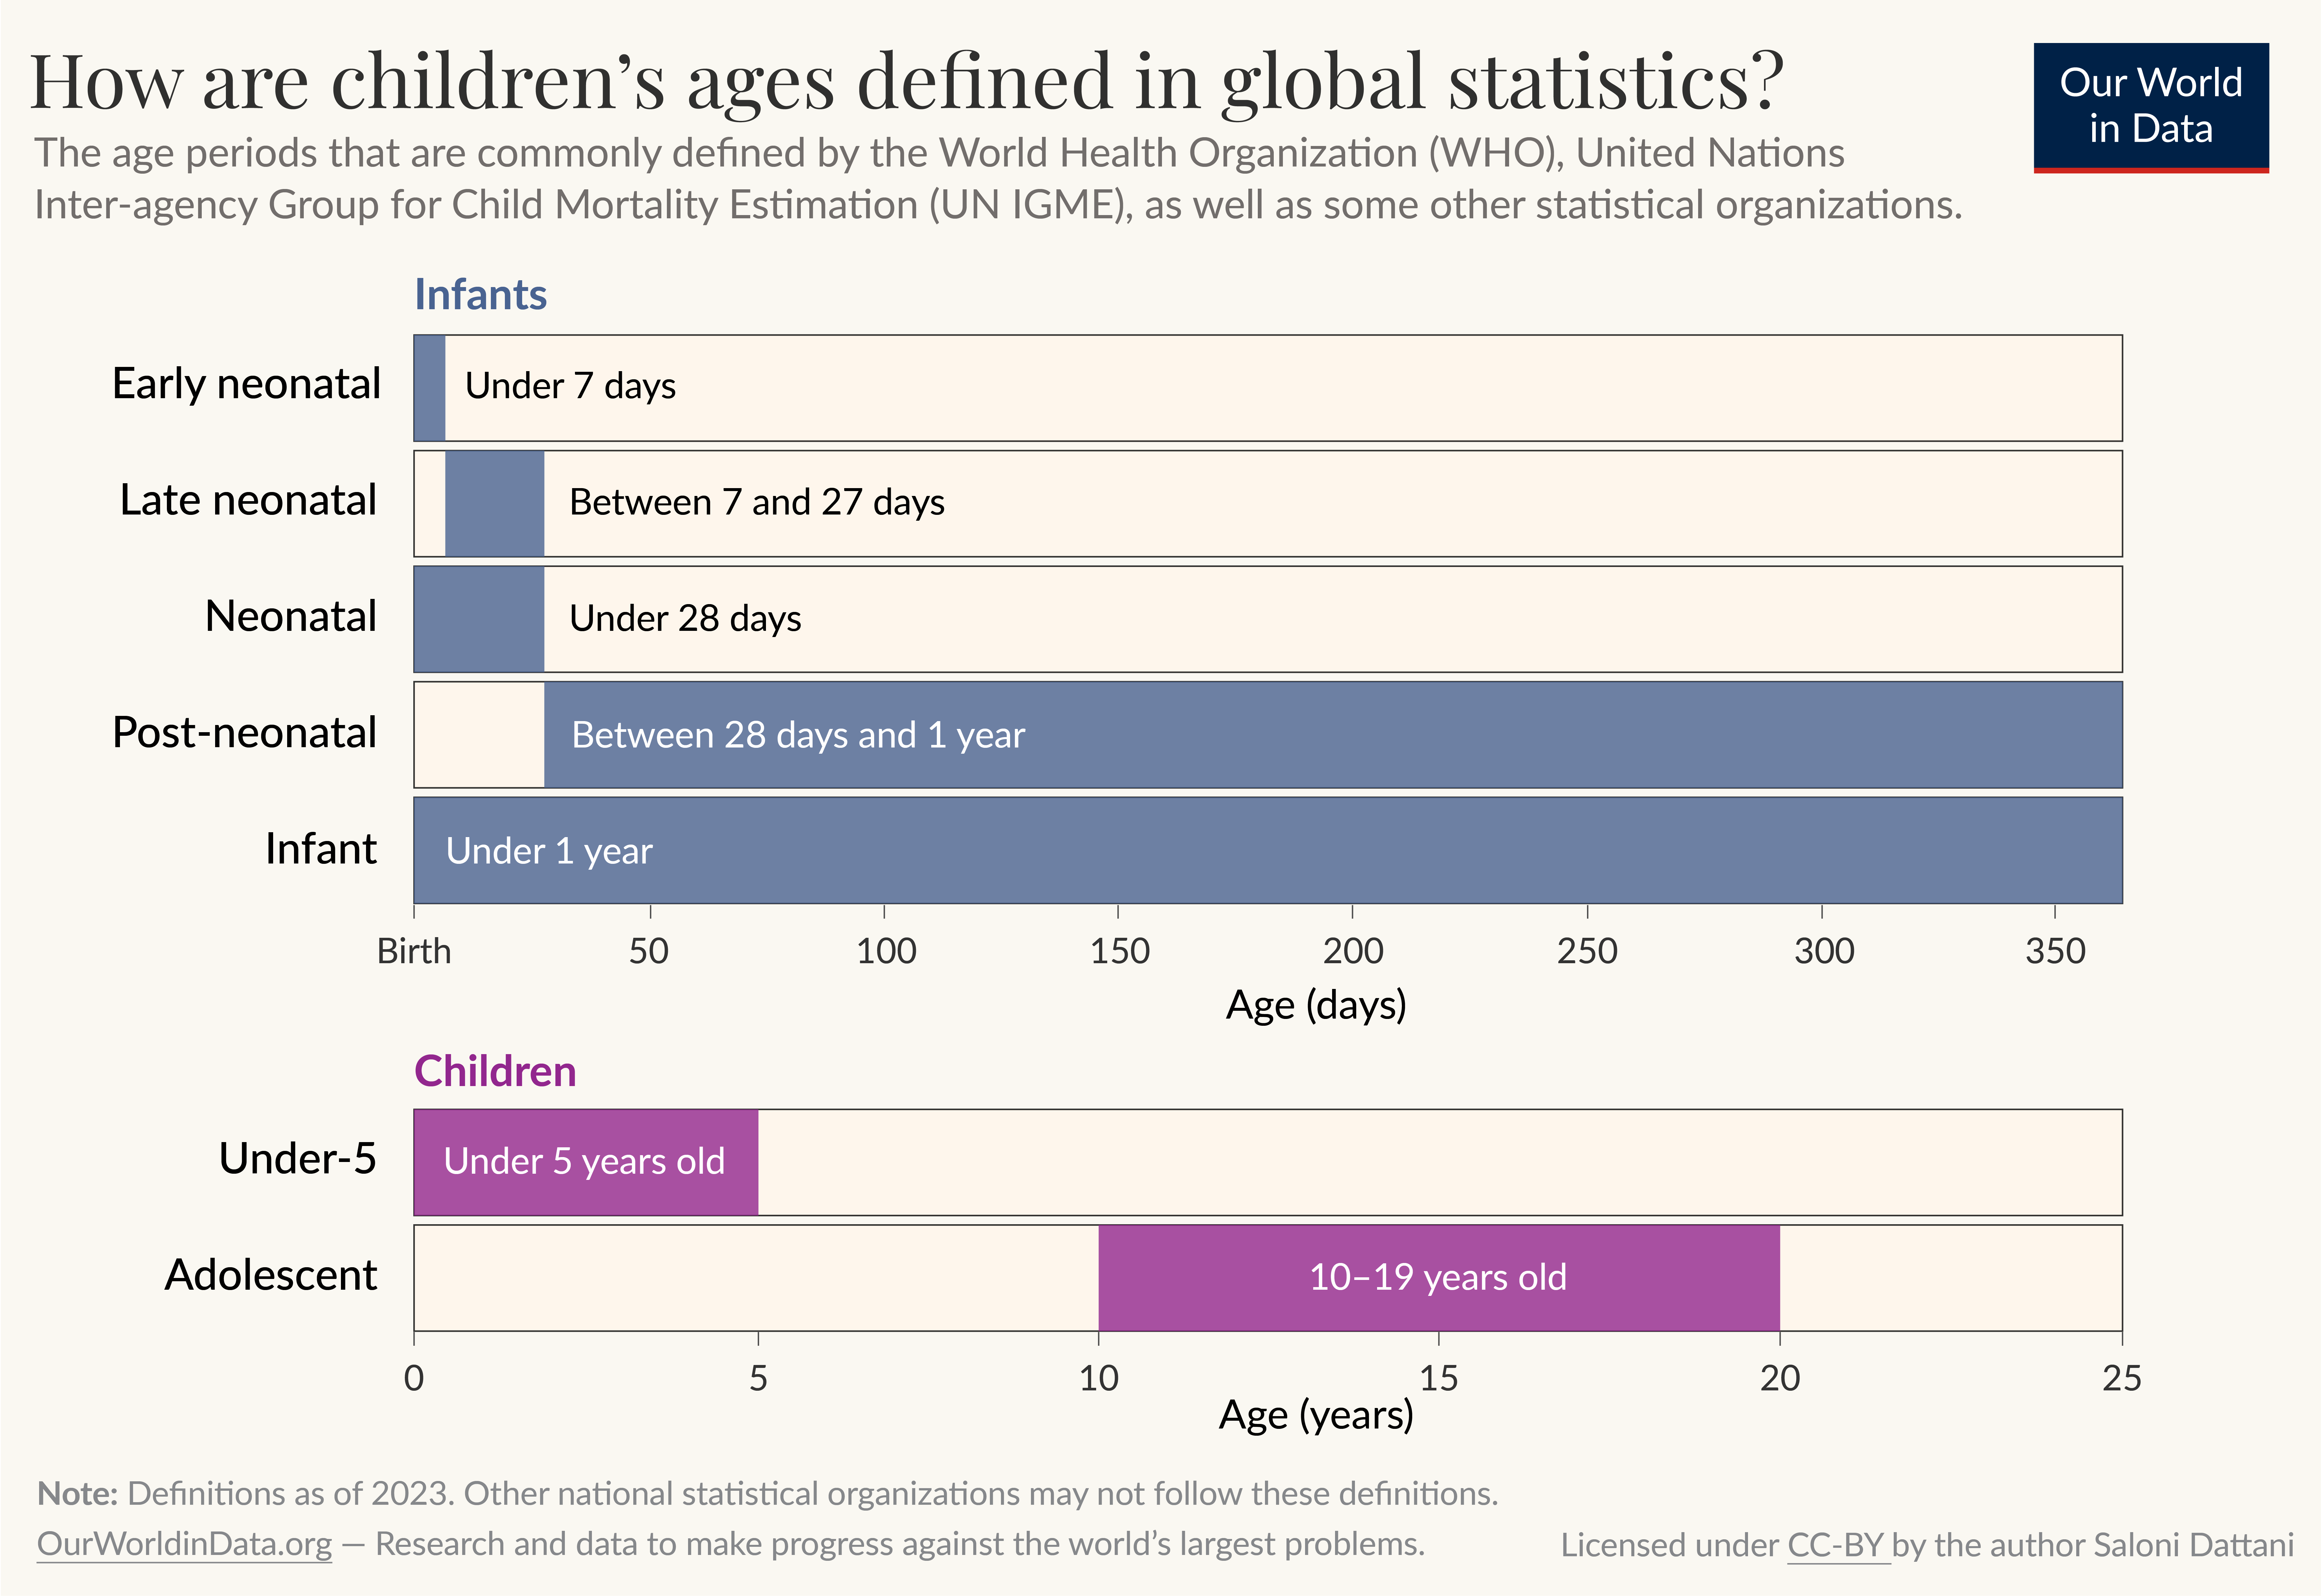 Image showing the definitions of different age groups of infants and children.